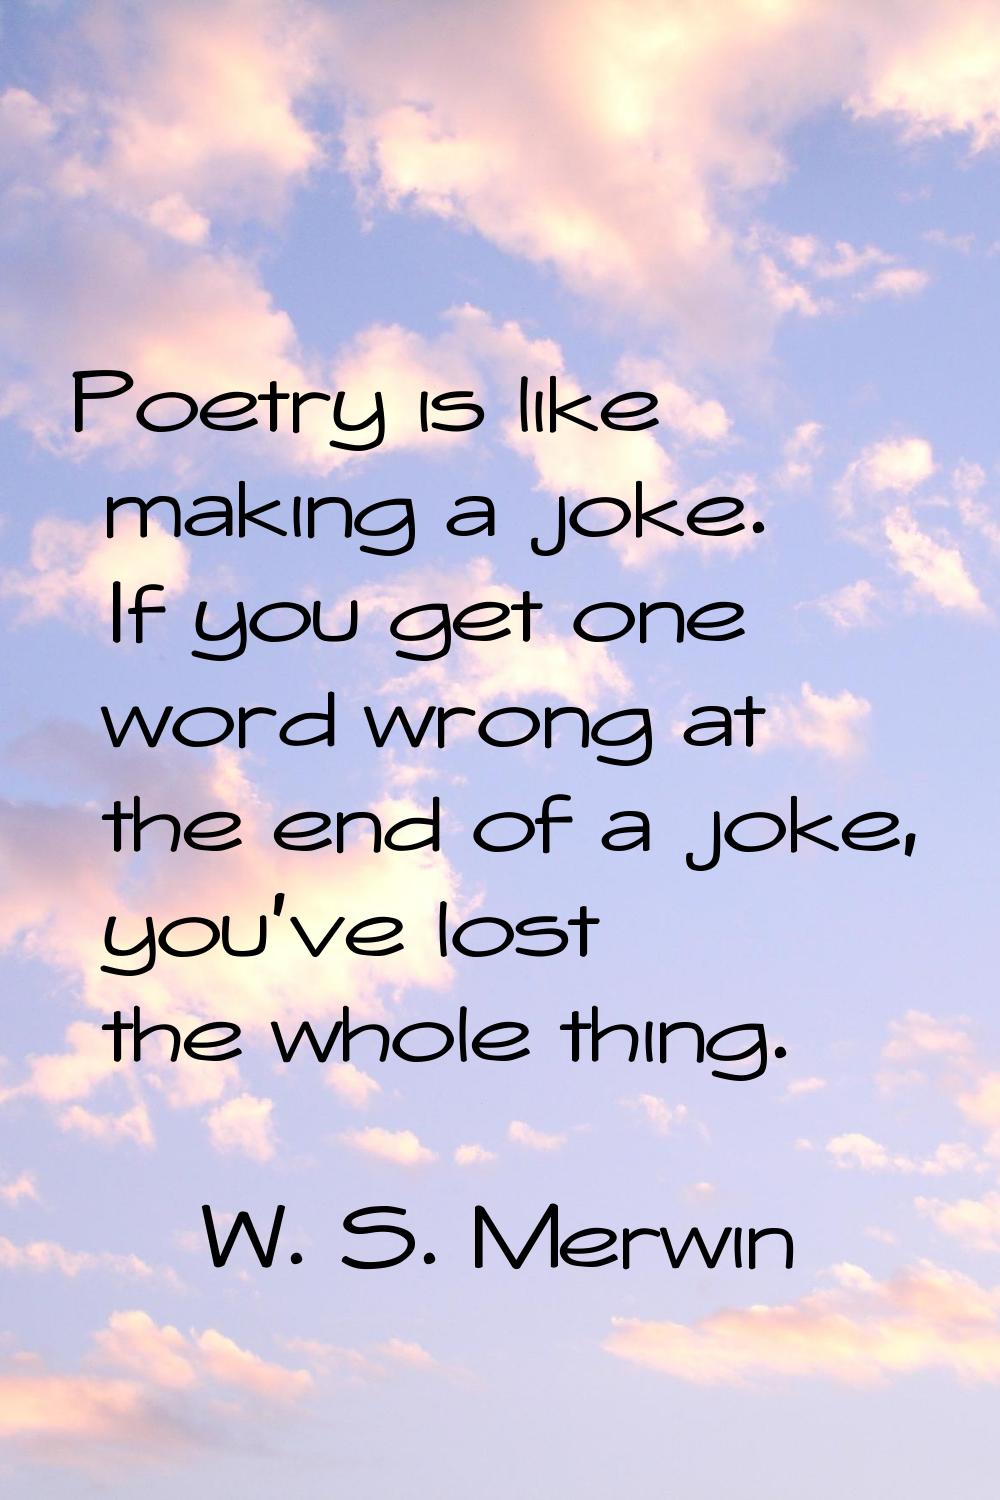 Poetry is like making a joke. If you get one word wrong at the end of a joke, you've lost the whole